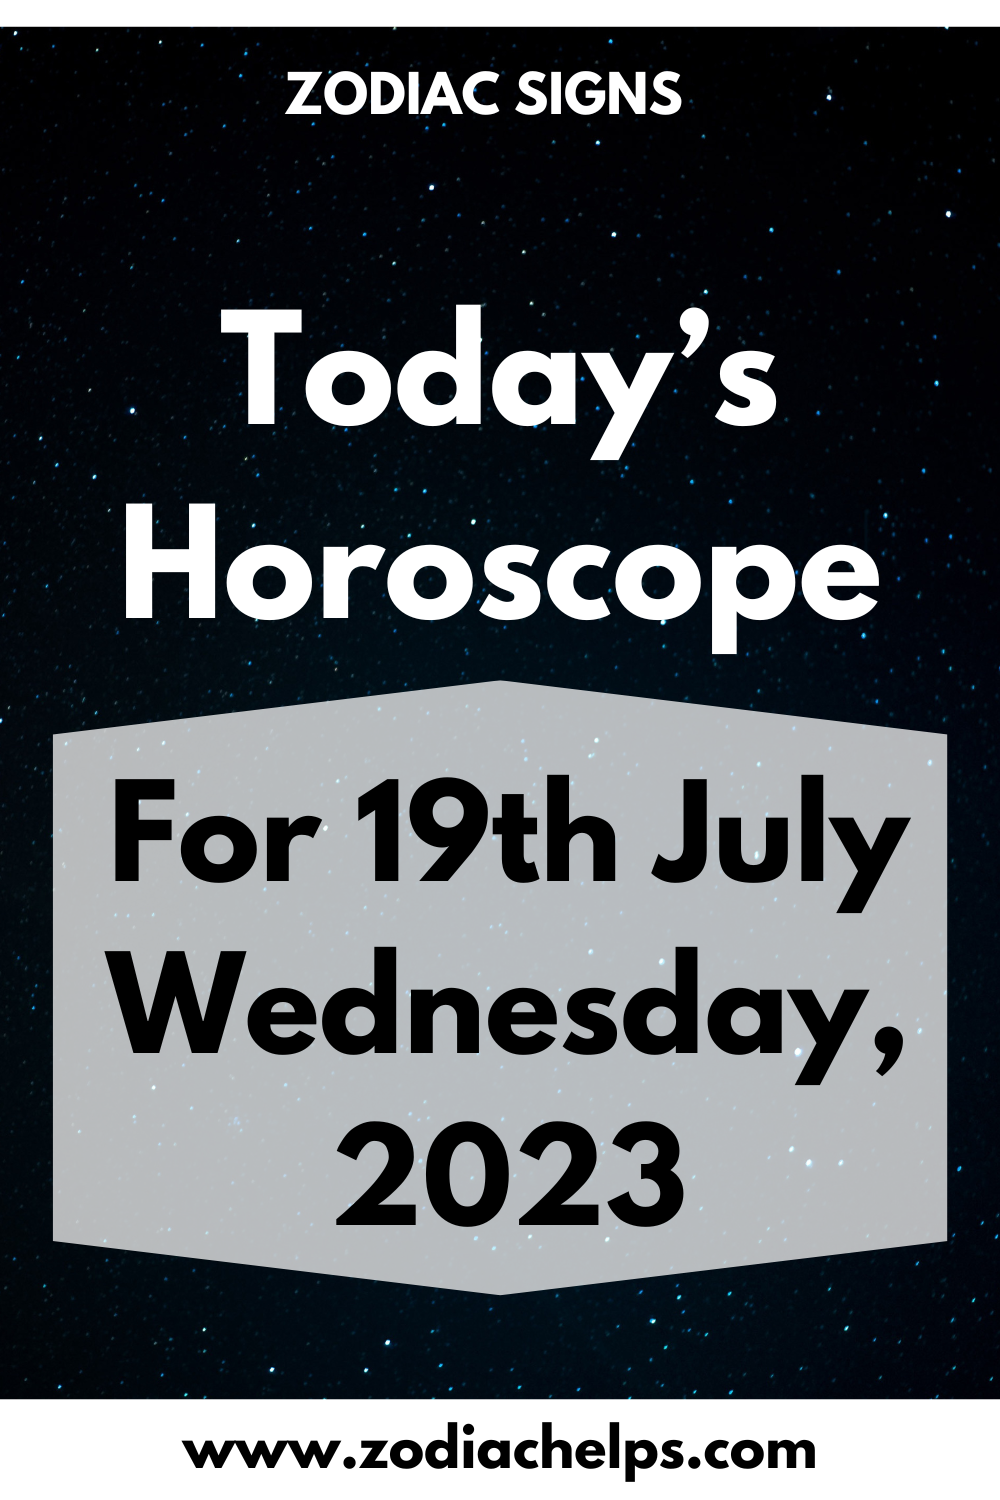 Today’s Horoscope for 19th July Wednesday, 2023